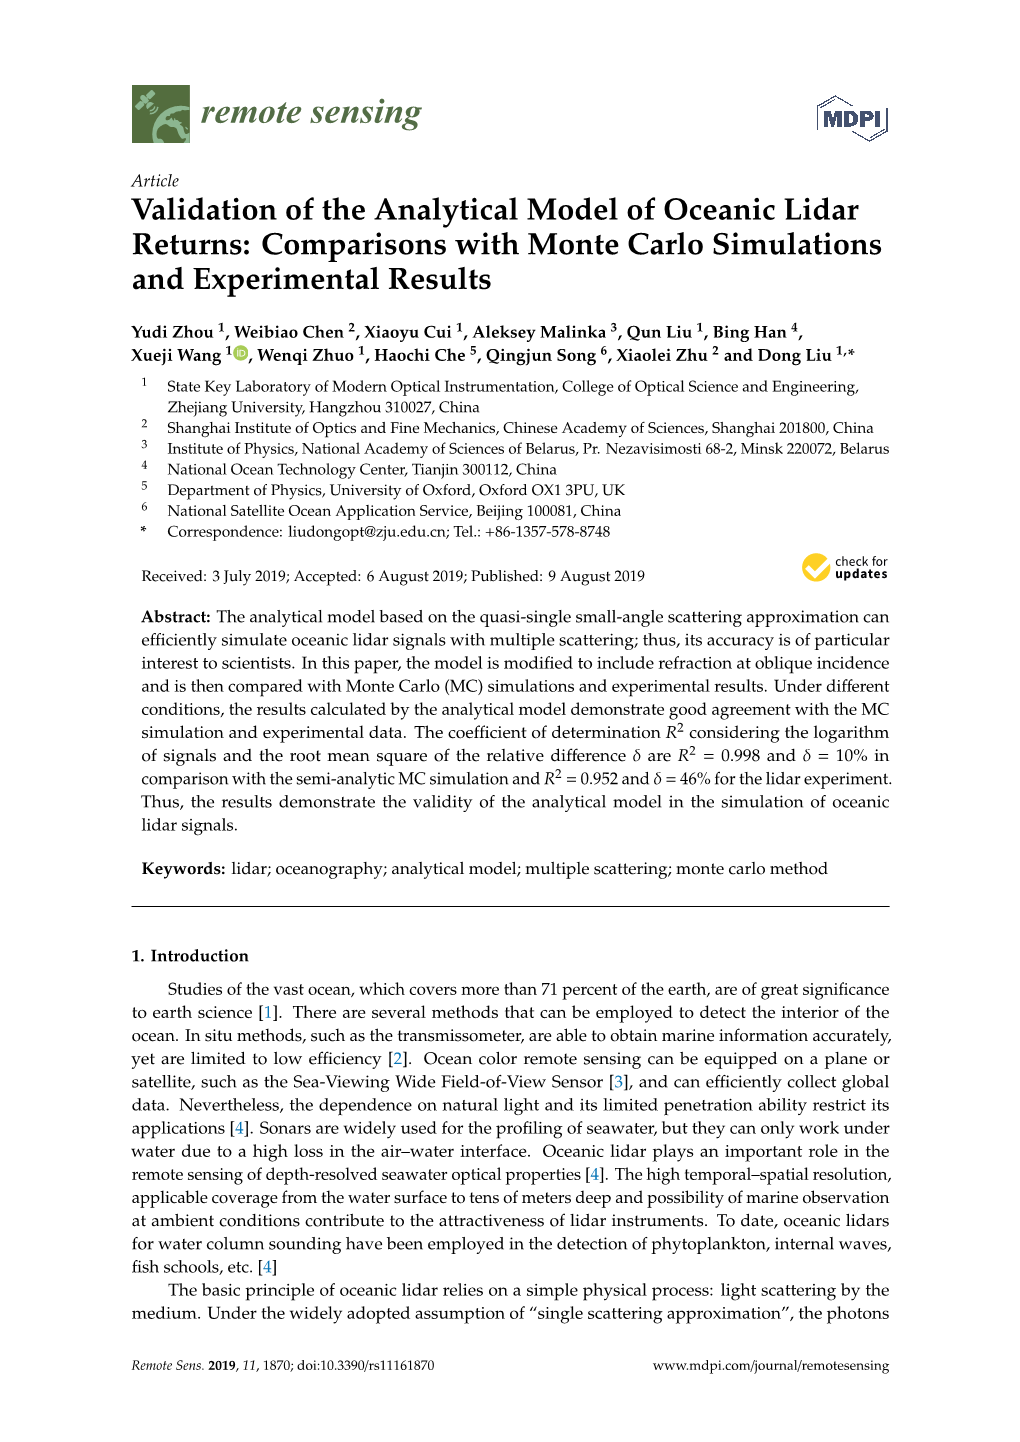 Validation of the Analytical Model of Oceanic Lidar Returns: Comparisons with Monte Carlo Simulations and Experimental Results